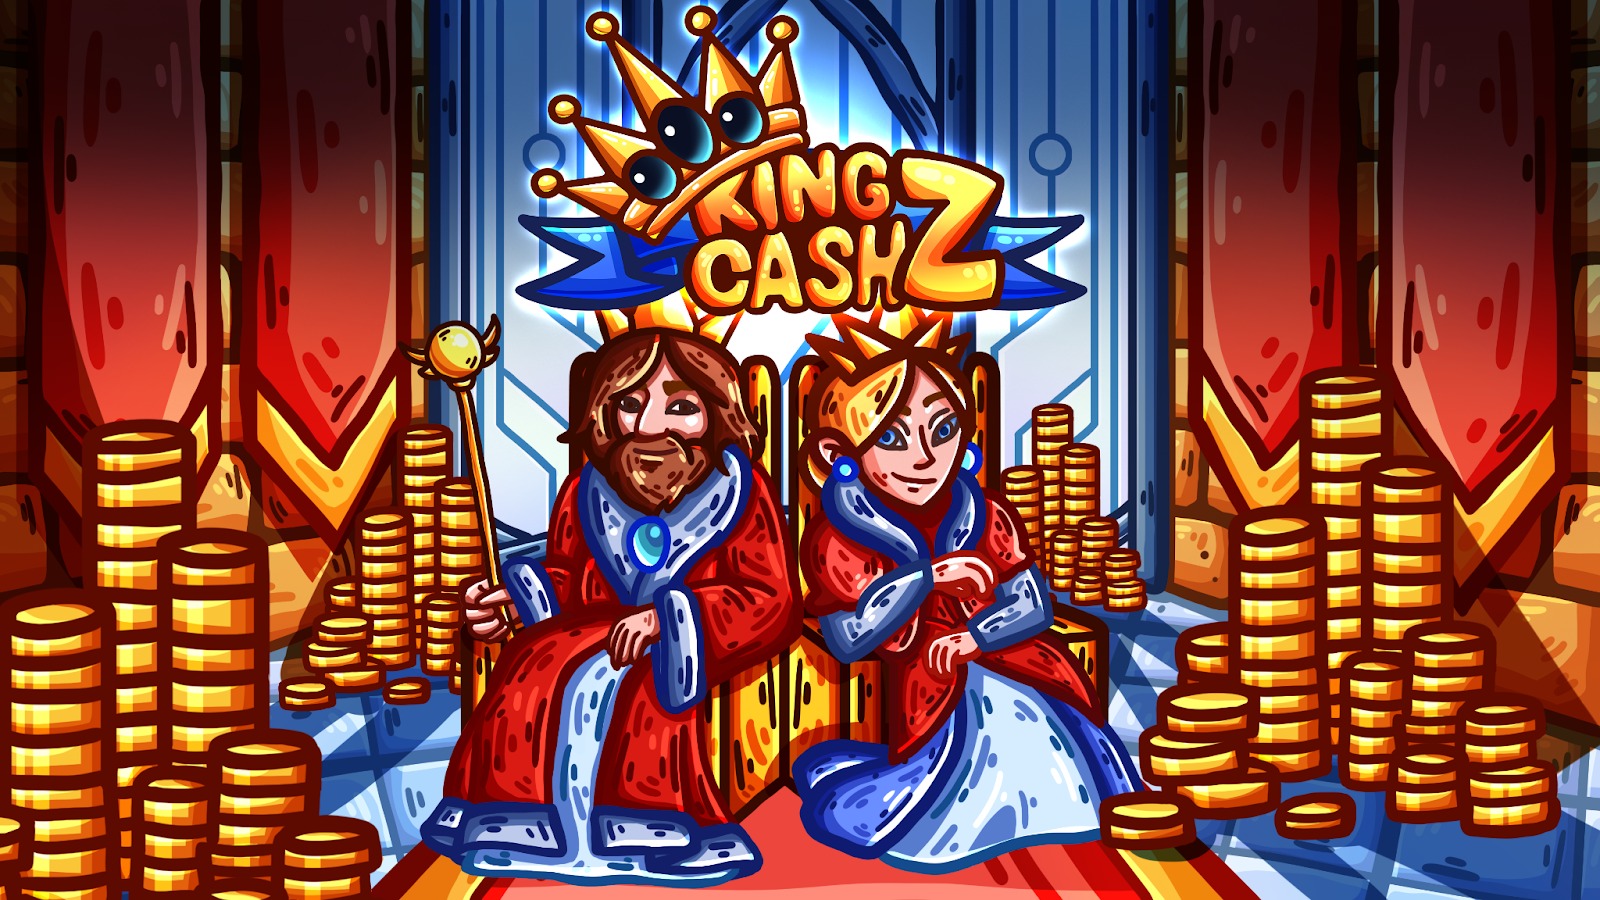 , KingZ Cash Announces IDO Presale: Get in on the Ground Floor of a Revolutionary Play-to-Earn Crypto Game